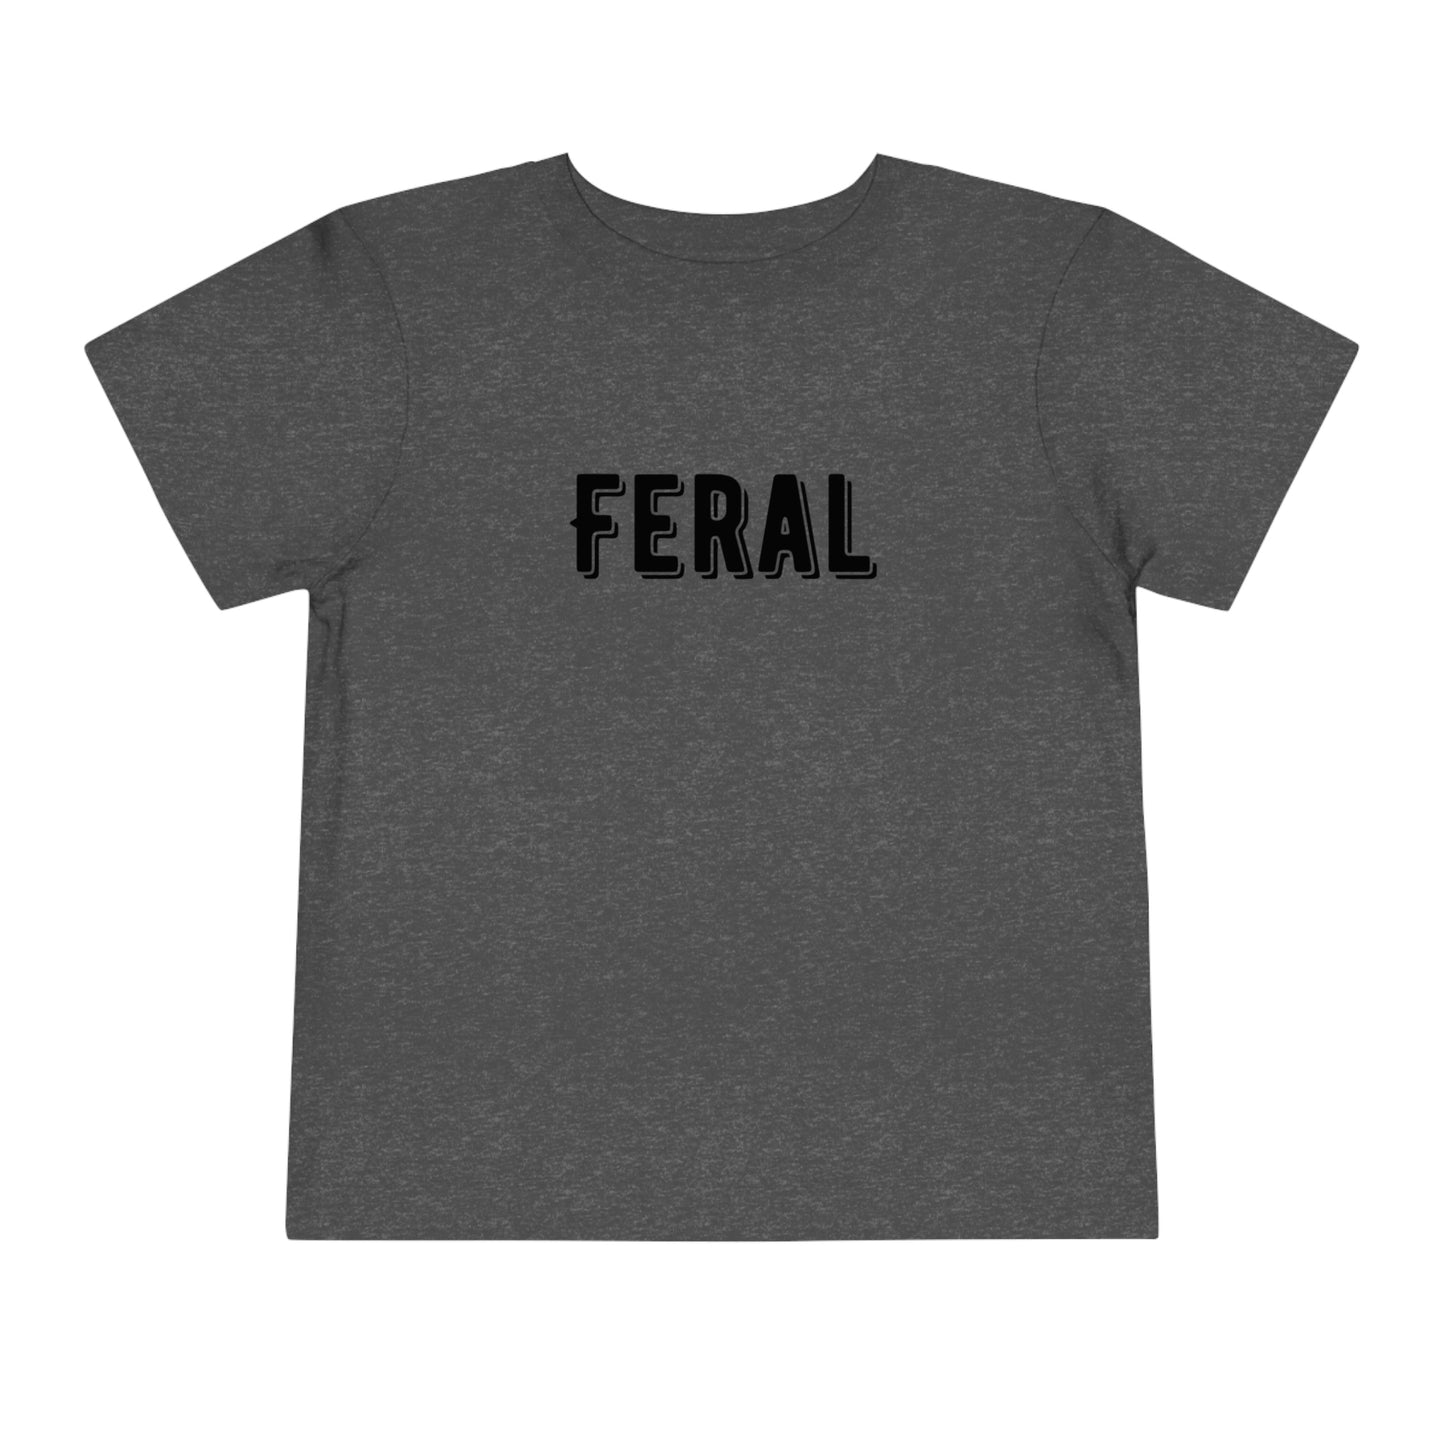 "Feral" Toddler Short Sleeve Tee (2T-5T)